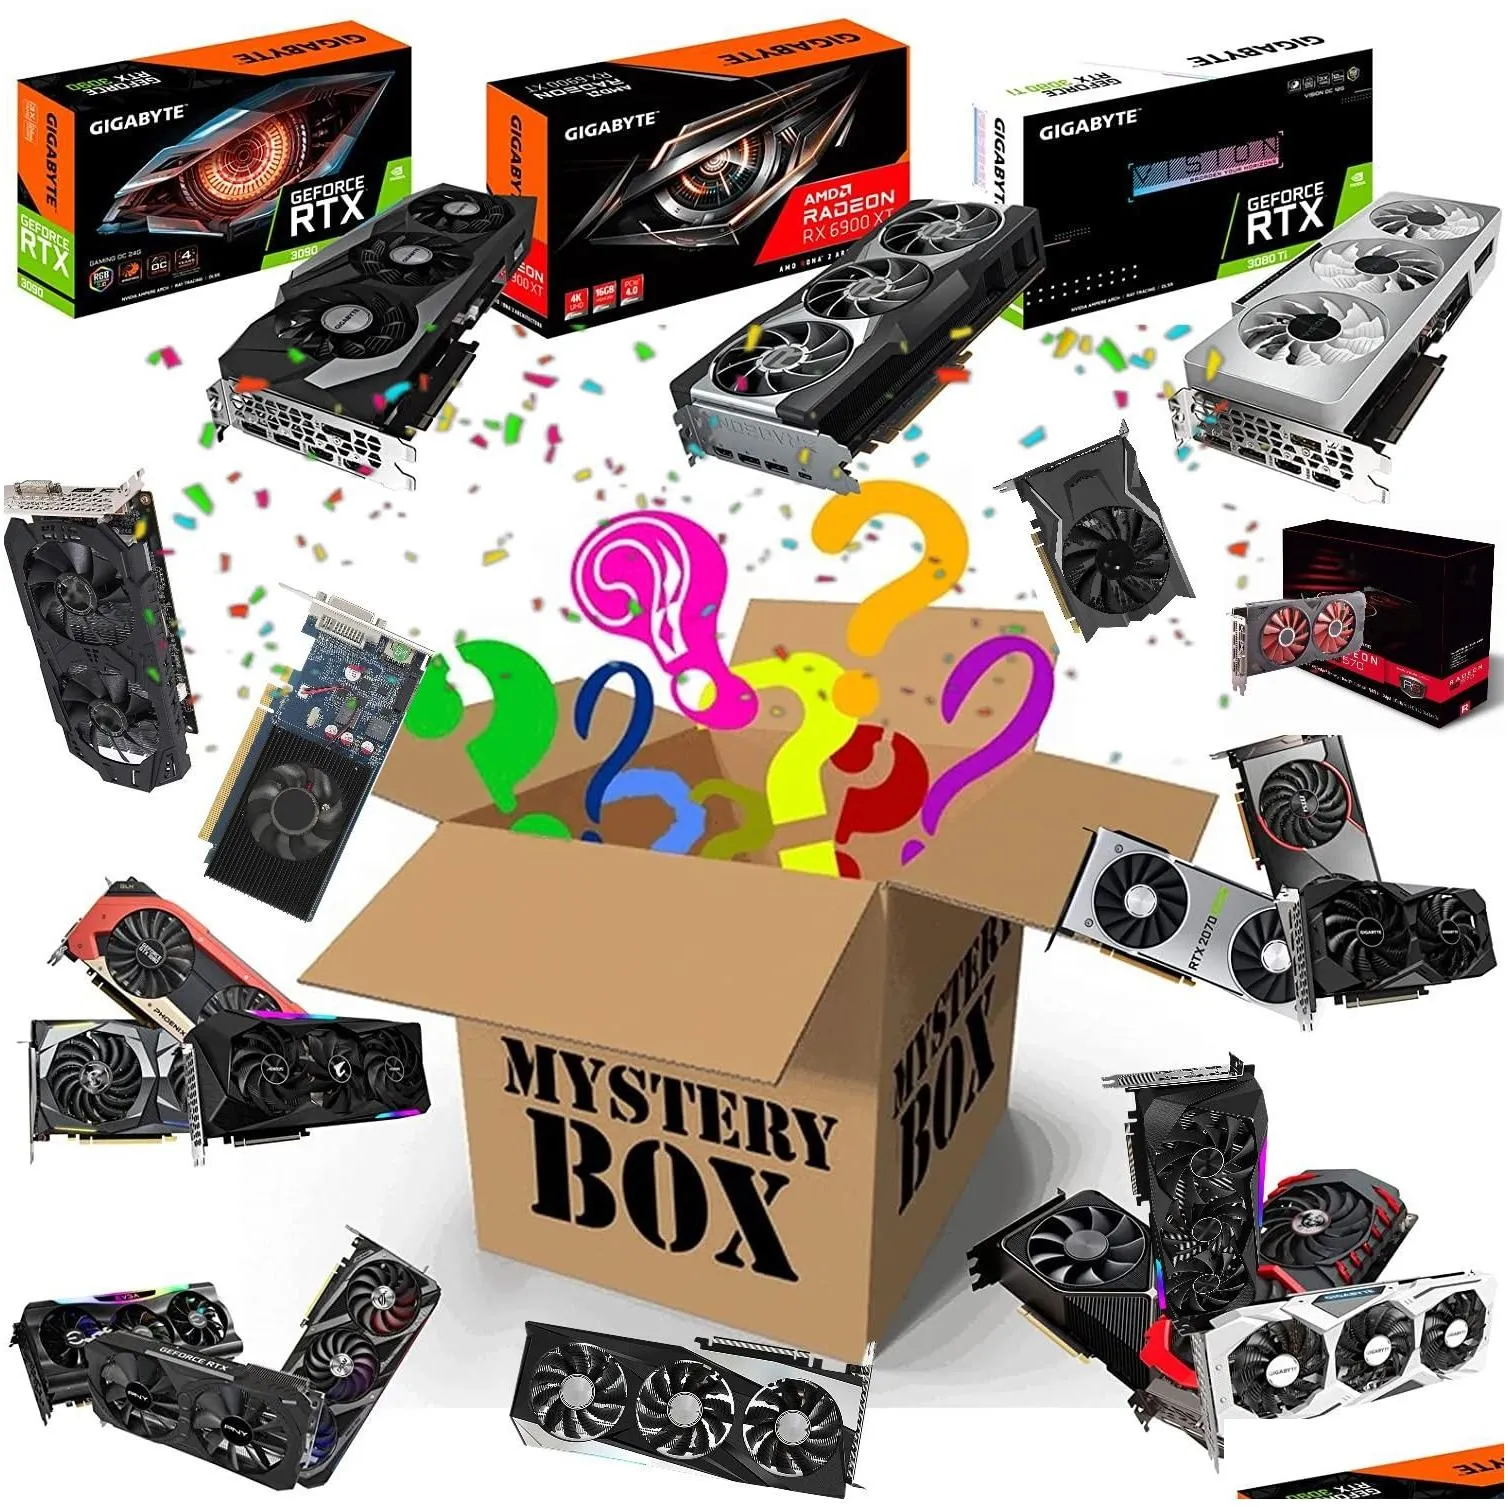 Smart Devices Cameras Gamepads Lucky Mystery Boxes Digital Electronics Earphones Cell Phone Accessories n7hk0